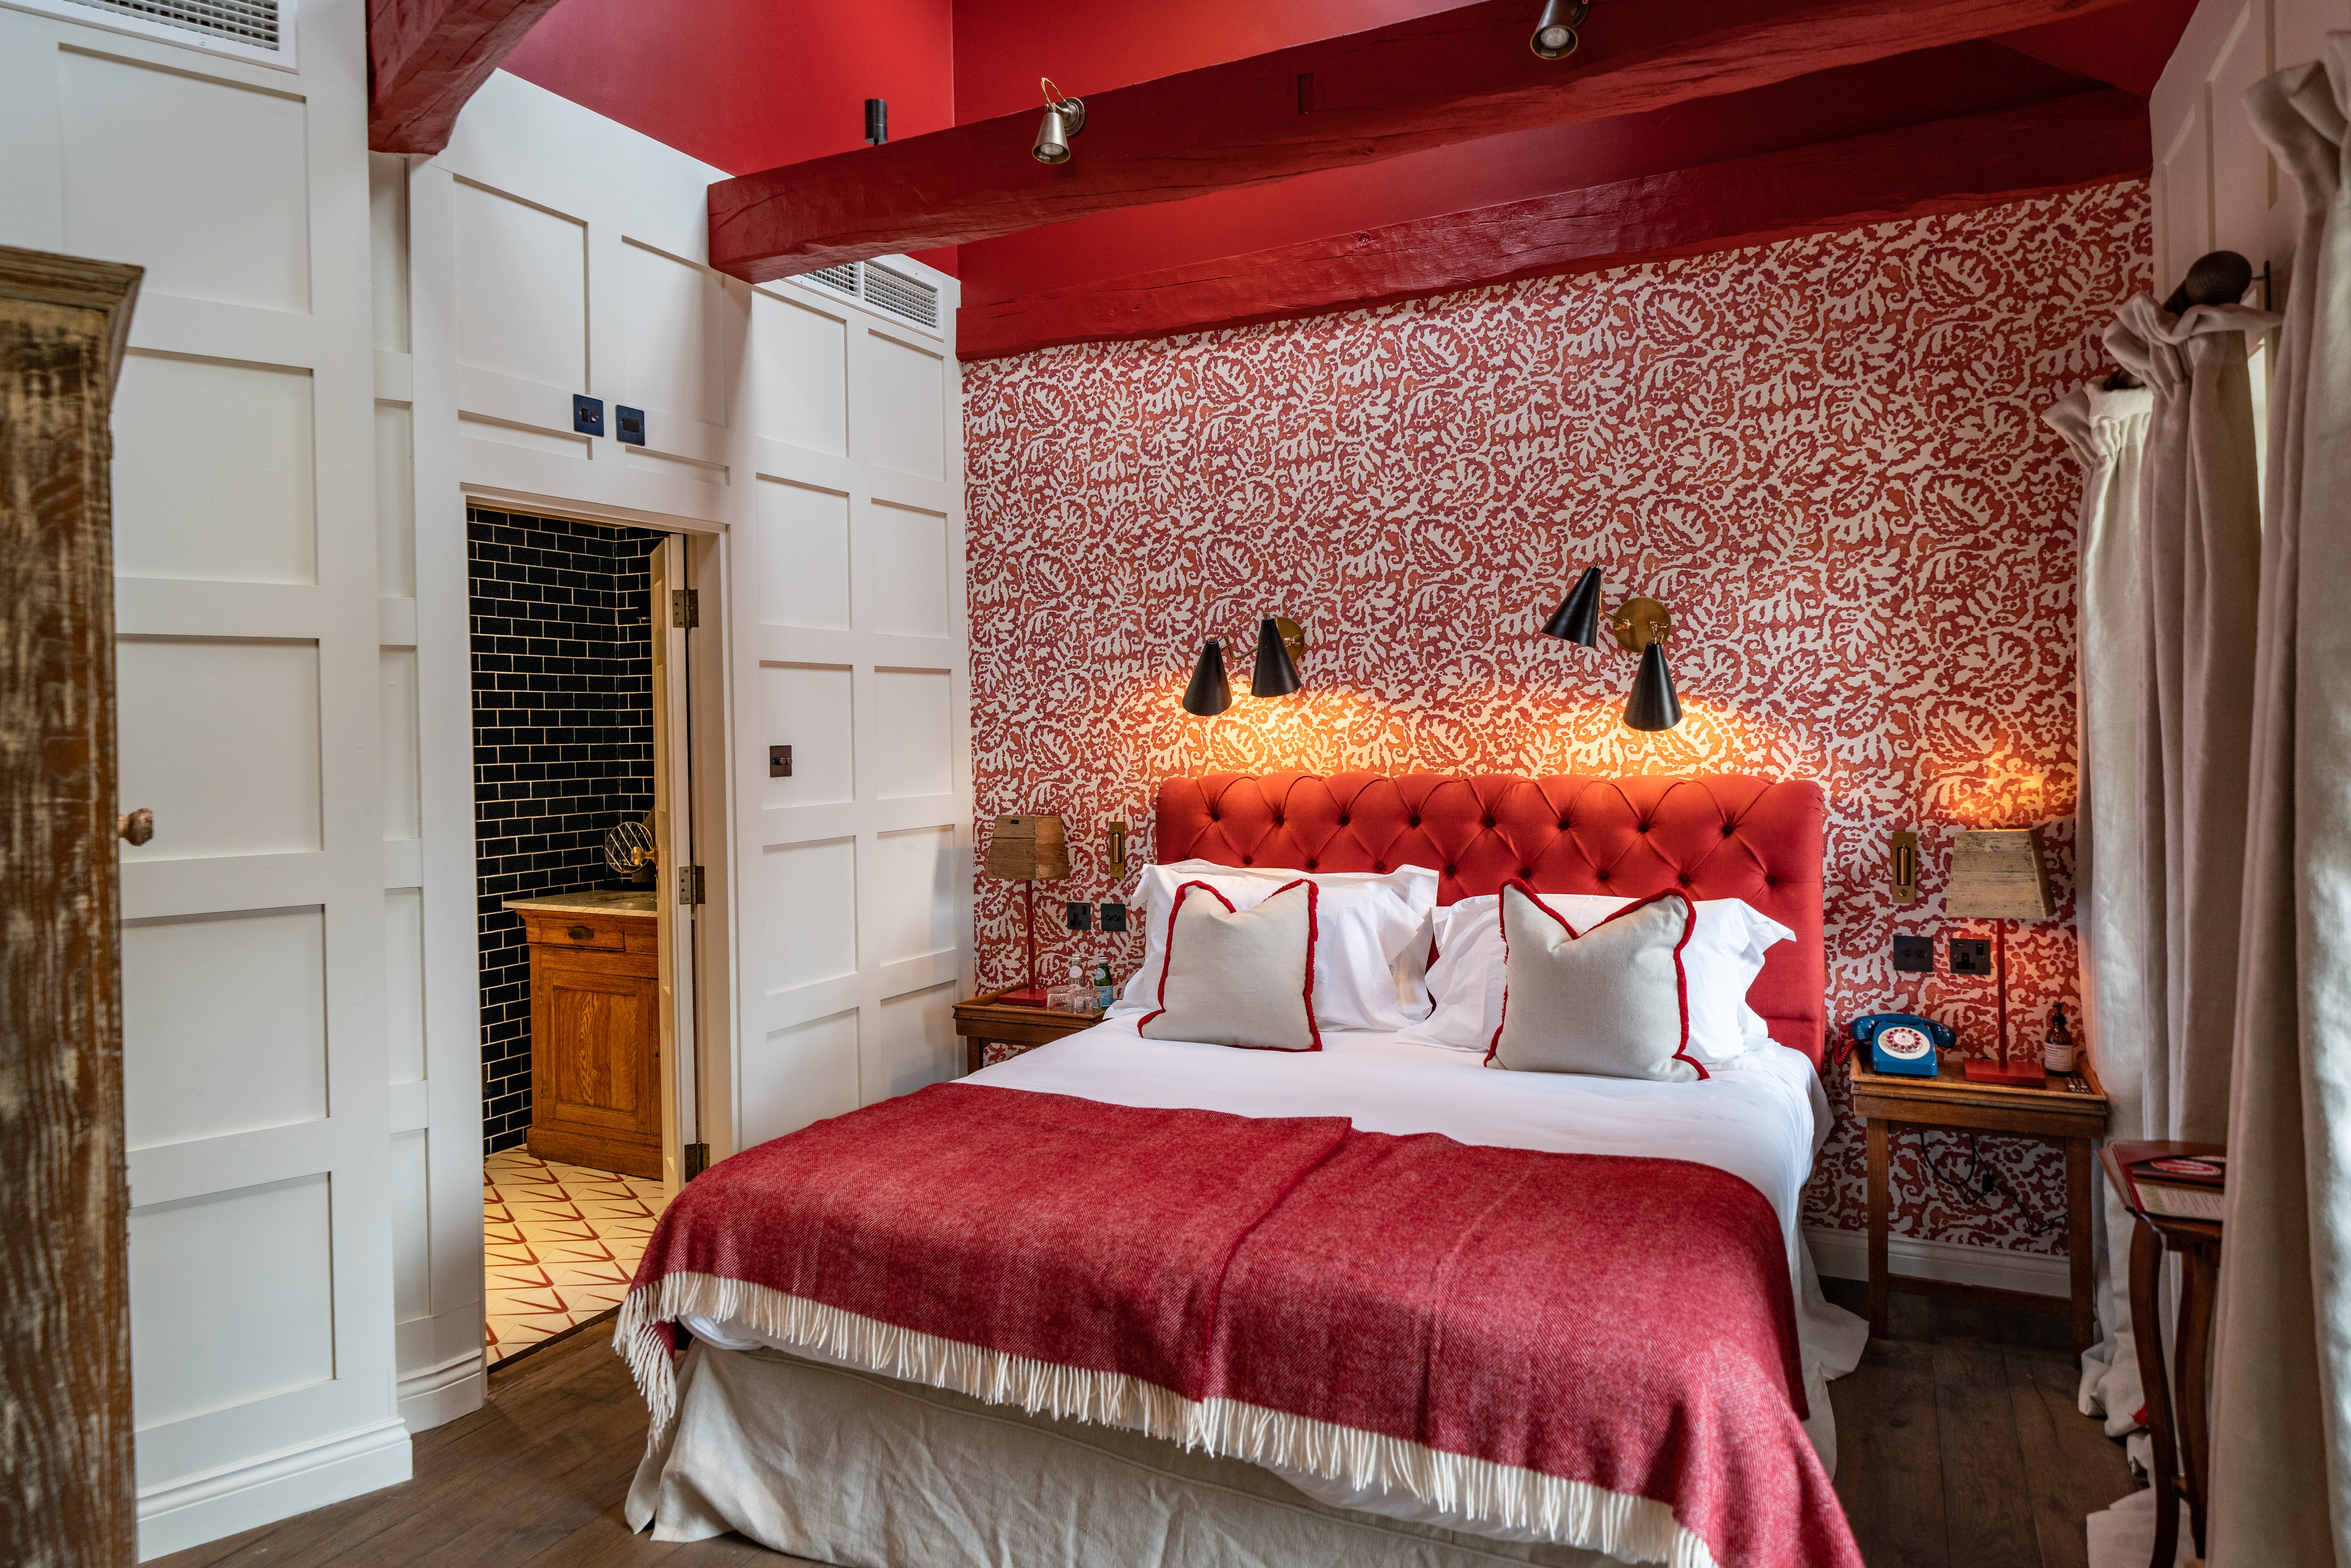 The Double Red Duke has pet-friendly rooms, with a charge of £25 per night